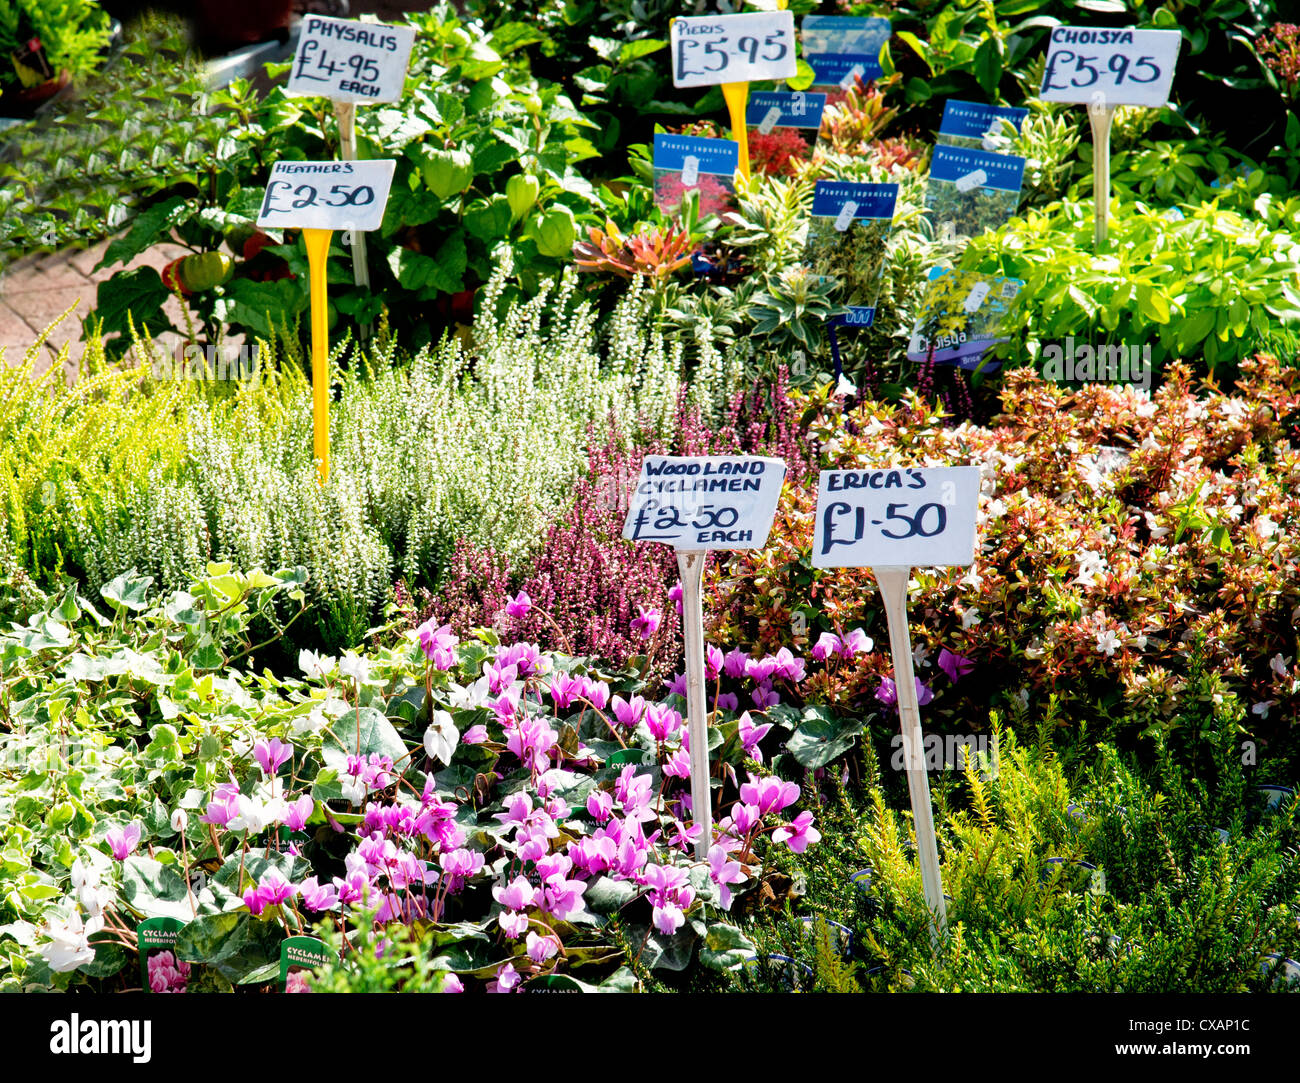 Flowers on display in a market stall Stock Photo